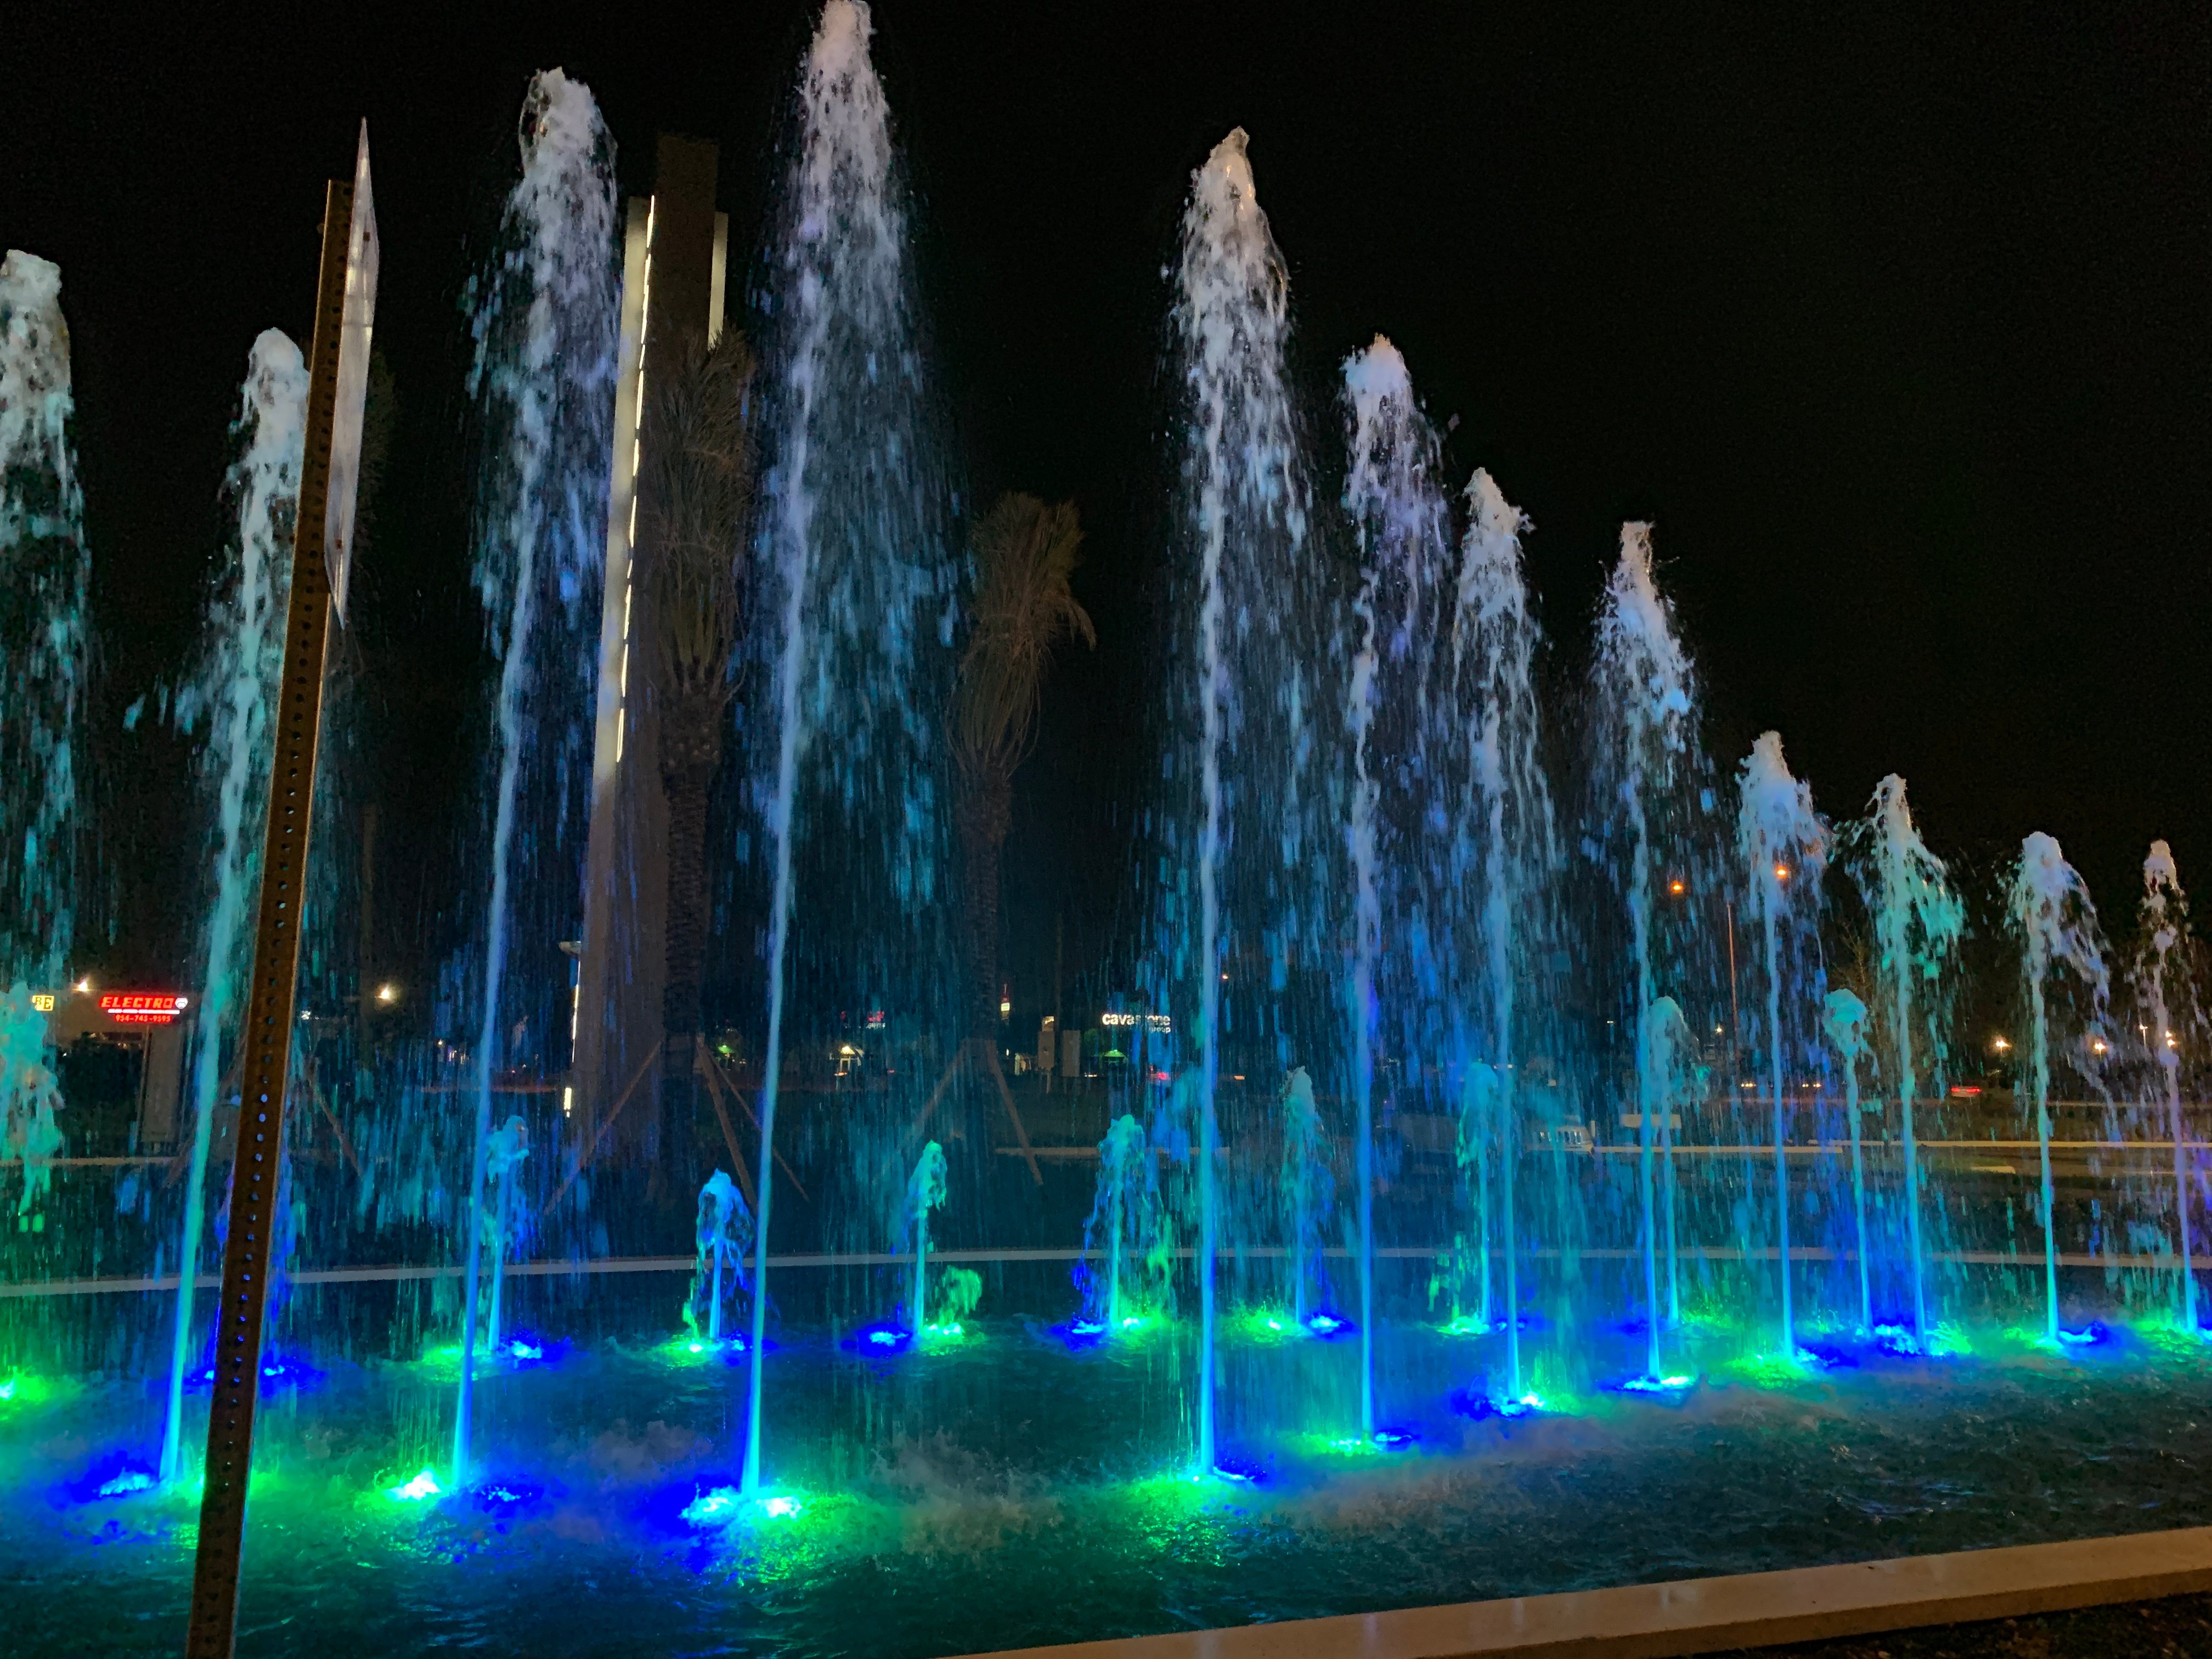 Fountain jets and lights at night